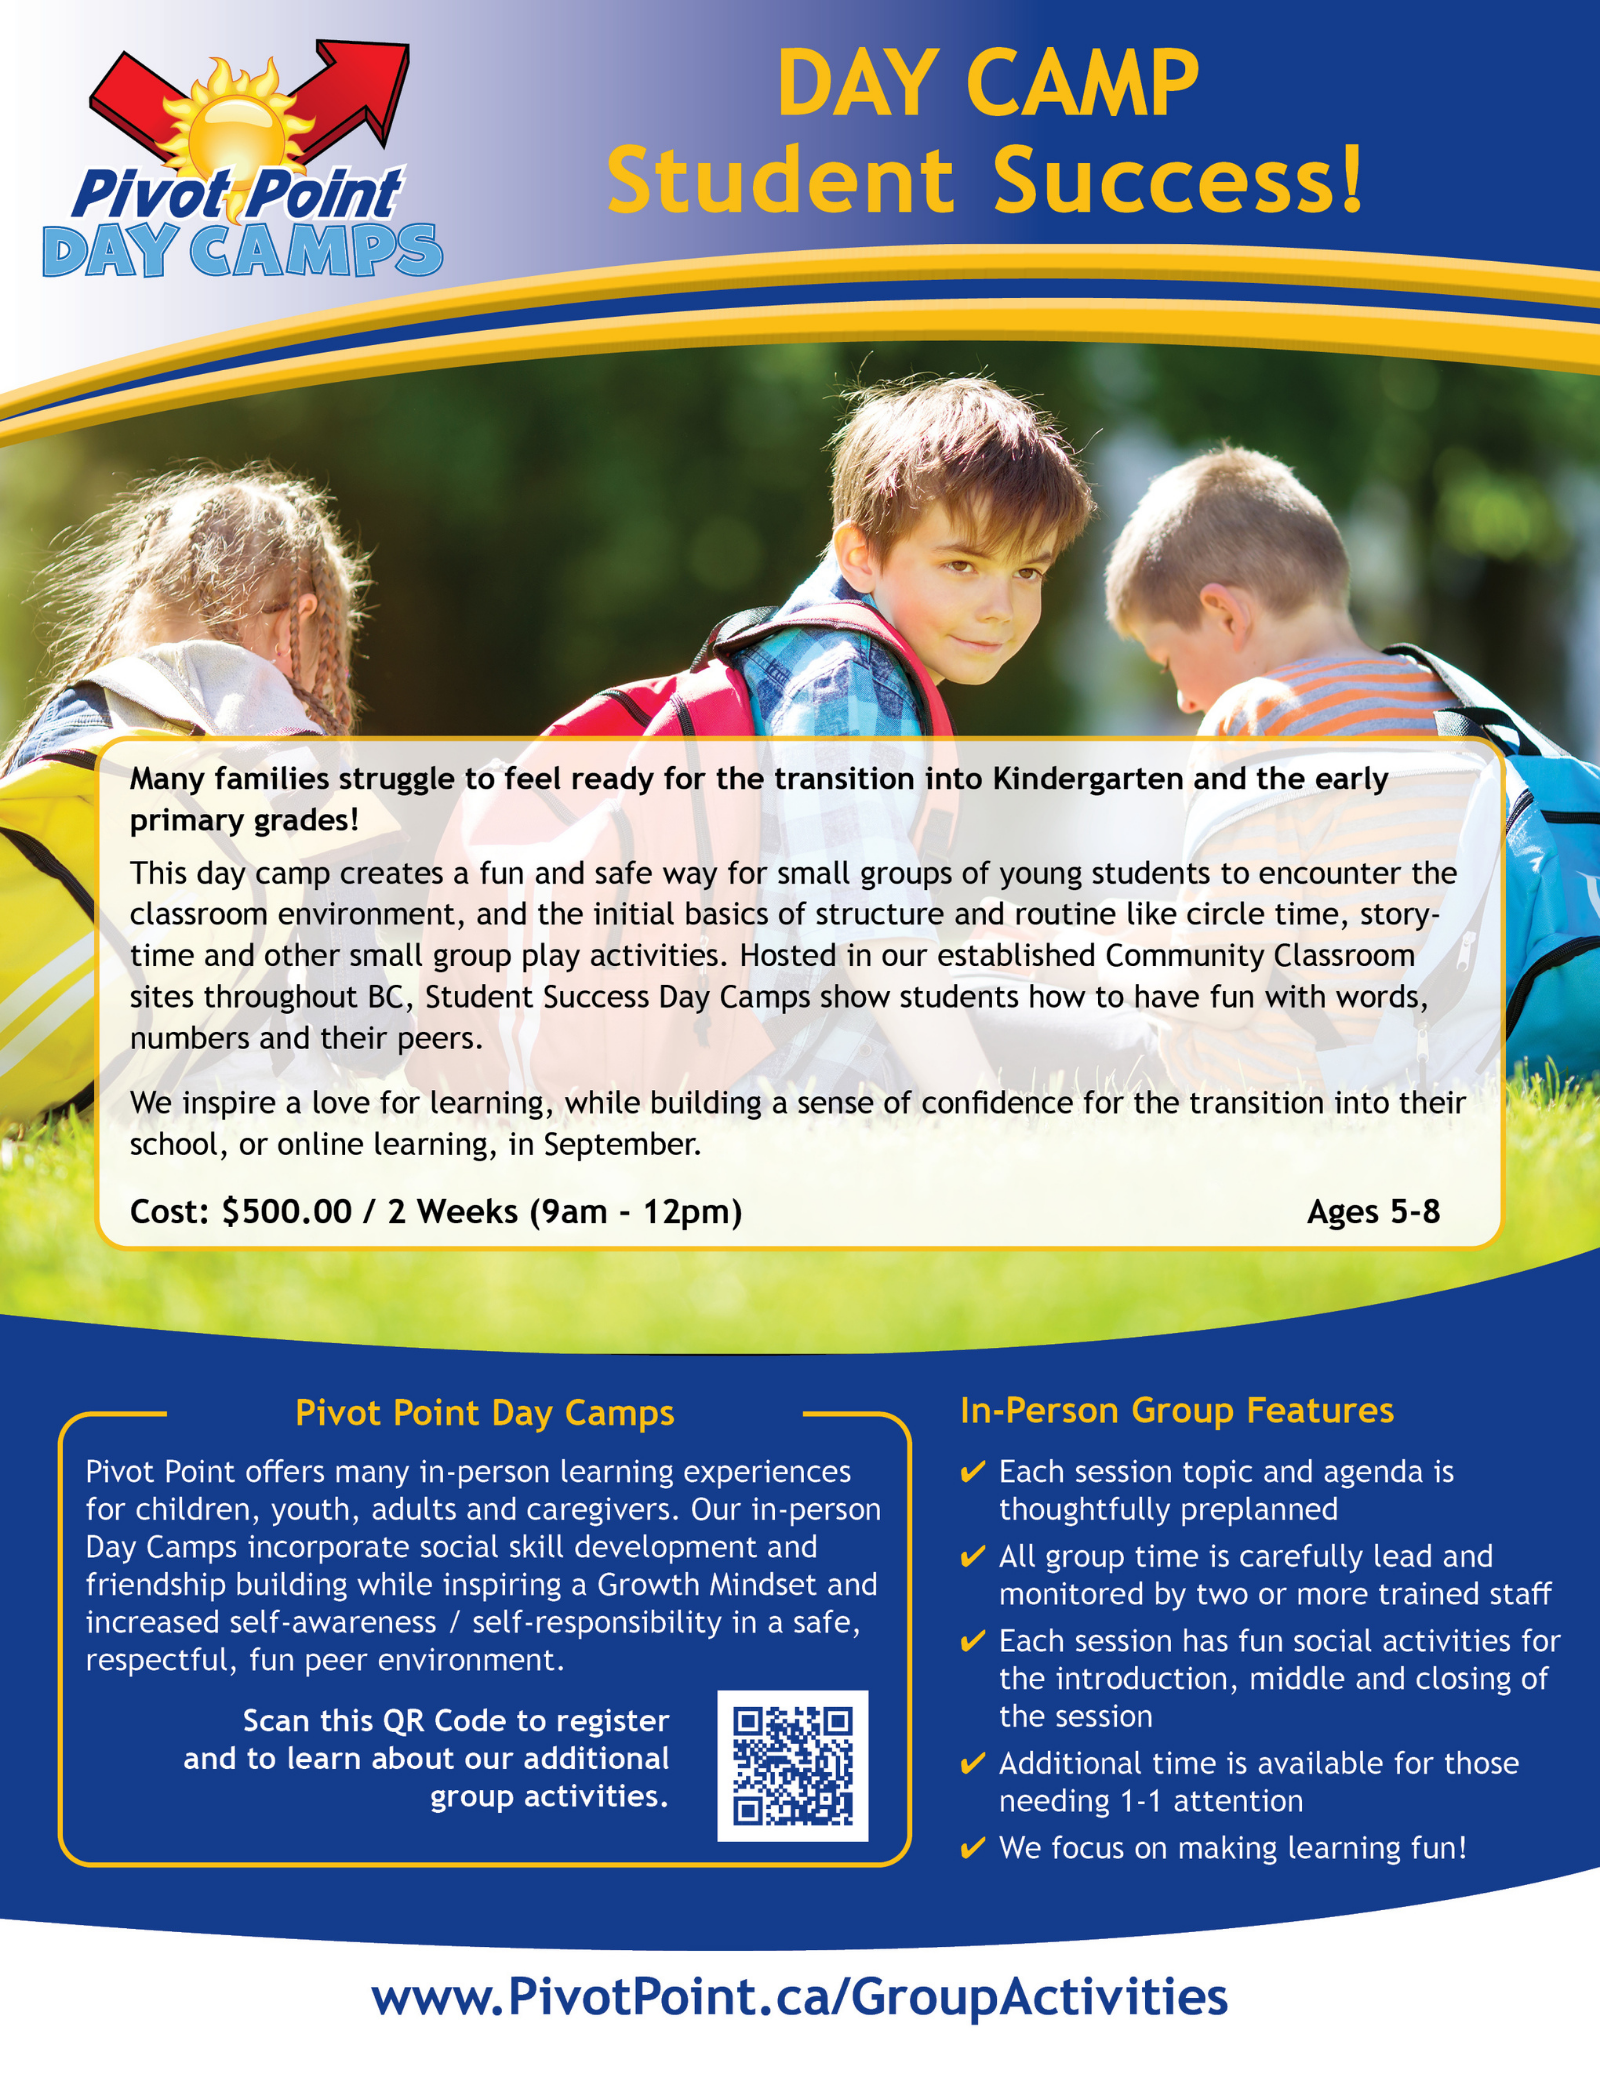 Summer Day Camp - Student Success (Prince George)